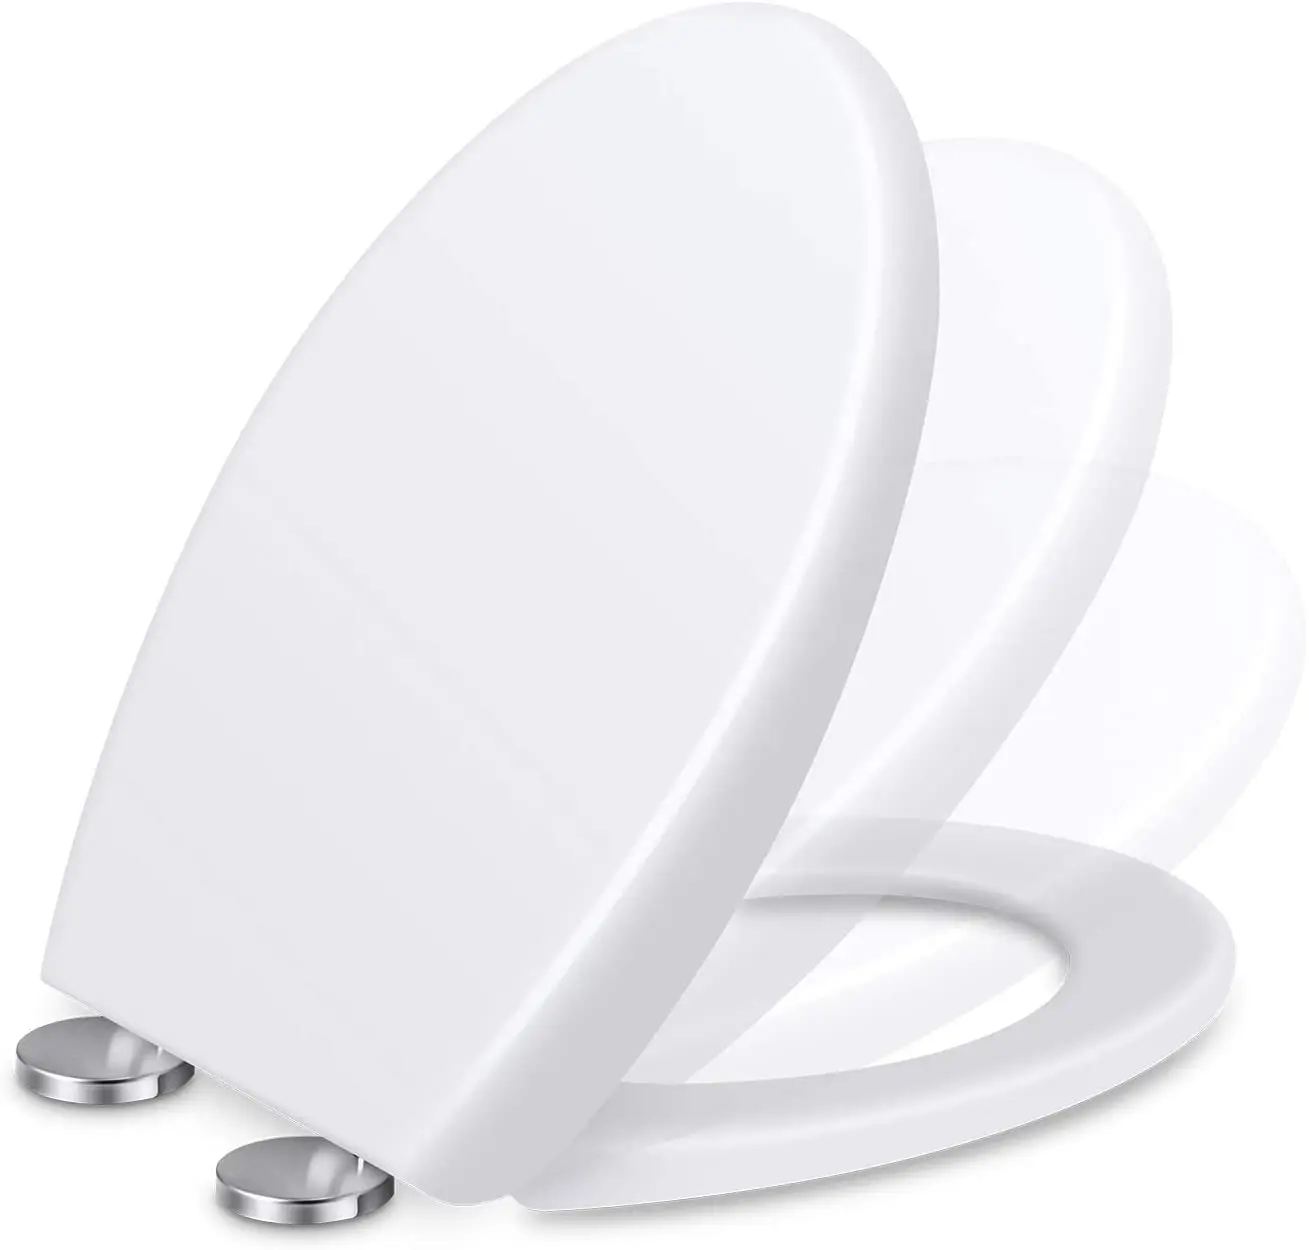 Heavy Duty Toilet Seat Soft Close White Oval Shape Quick Release Fixing Hinges 